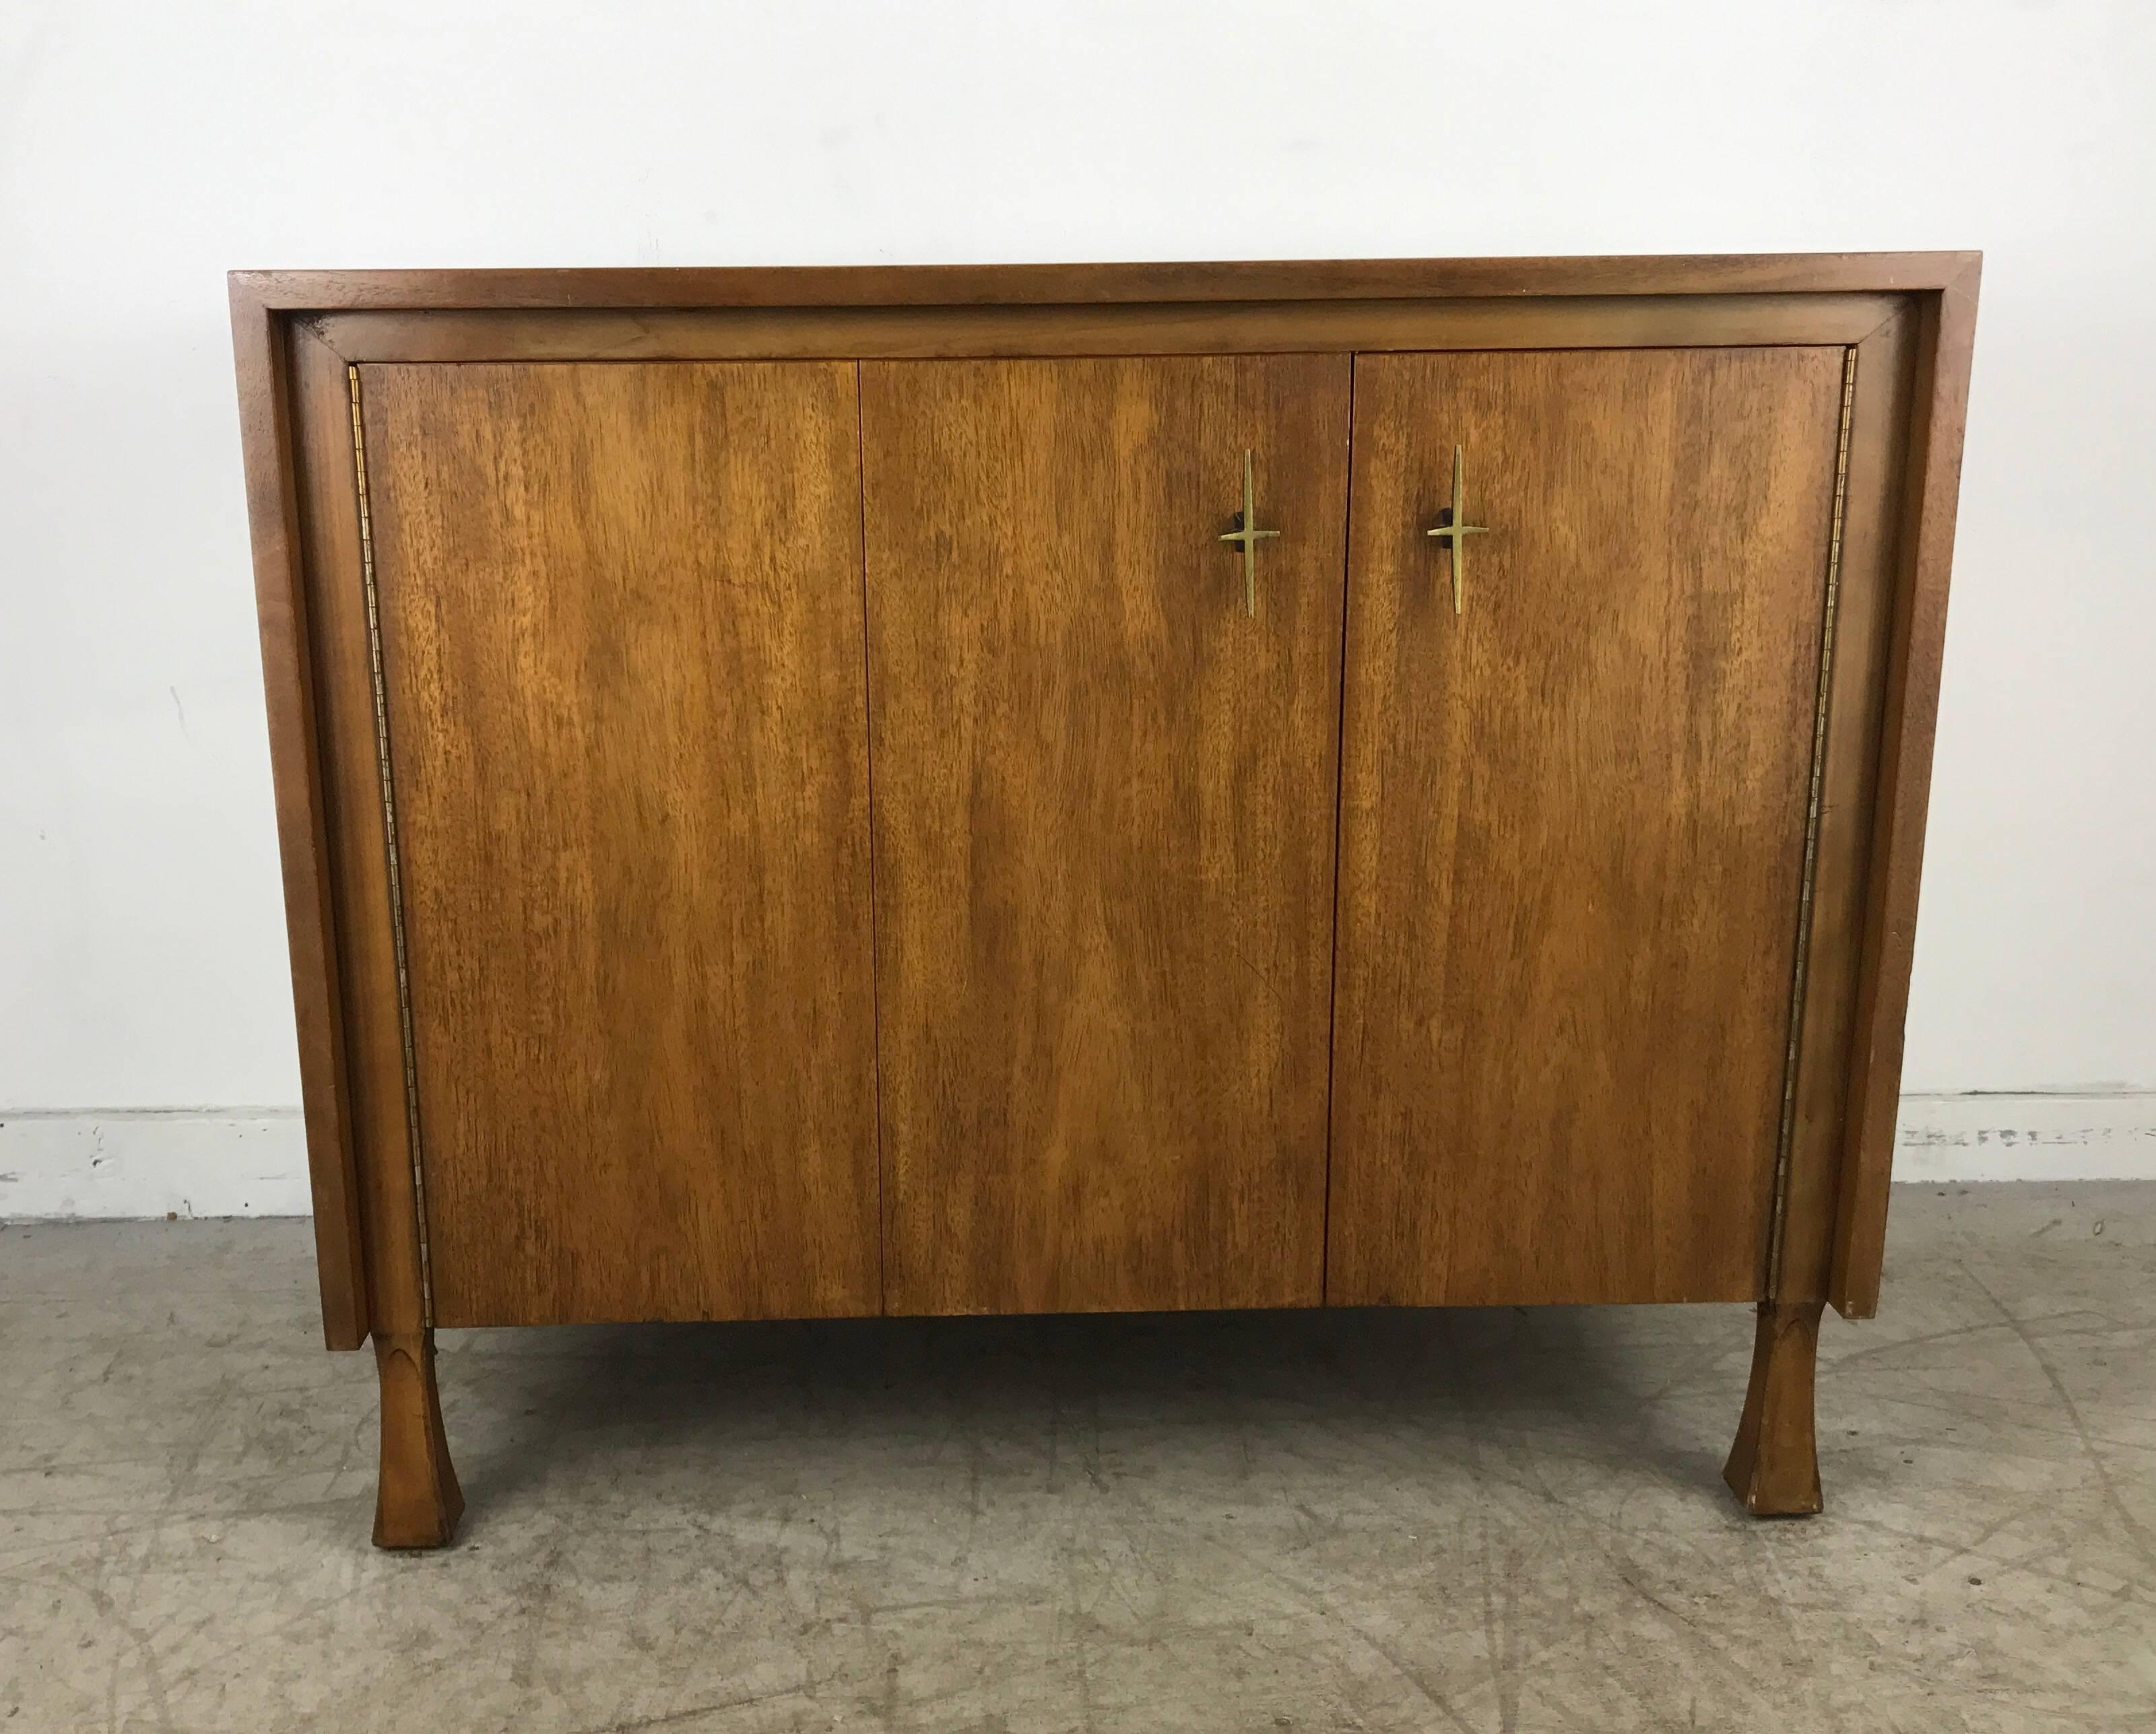 Stylized ribbon mahogany cabinet or dresser by John Widdicomb, superior quality, brass star pulls featuring left bi-fold door, three generous drawers, Classic modernist design, hand delivery available to New York City.